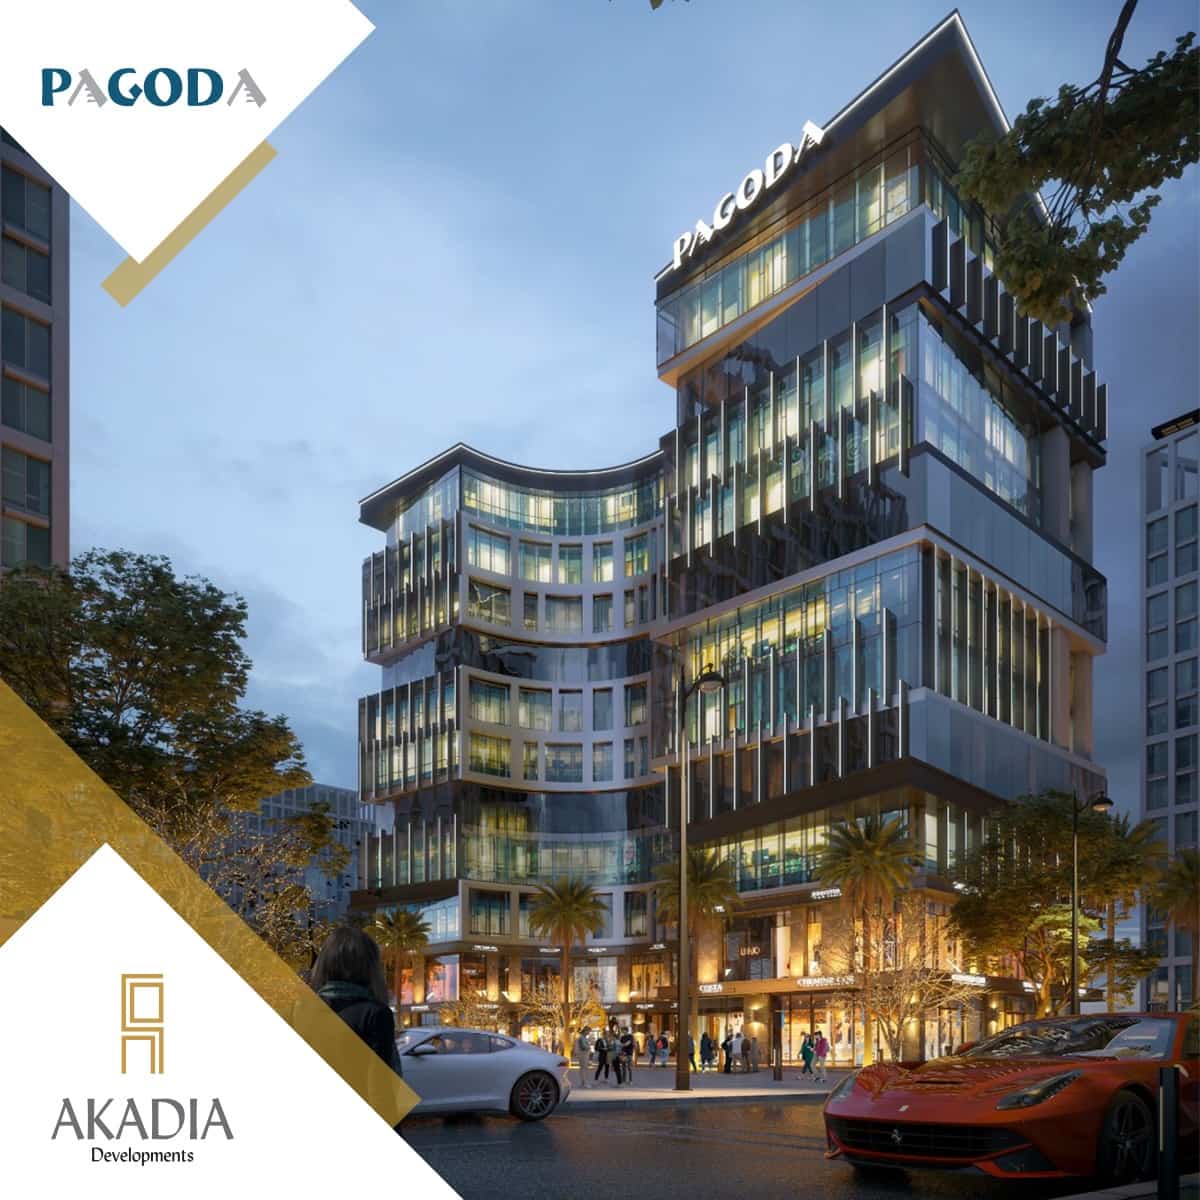 Buy a shop with an area of ​​75 meters in Pagoda Mall New Capital